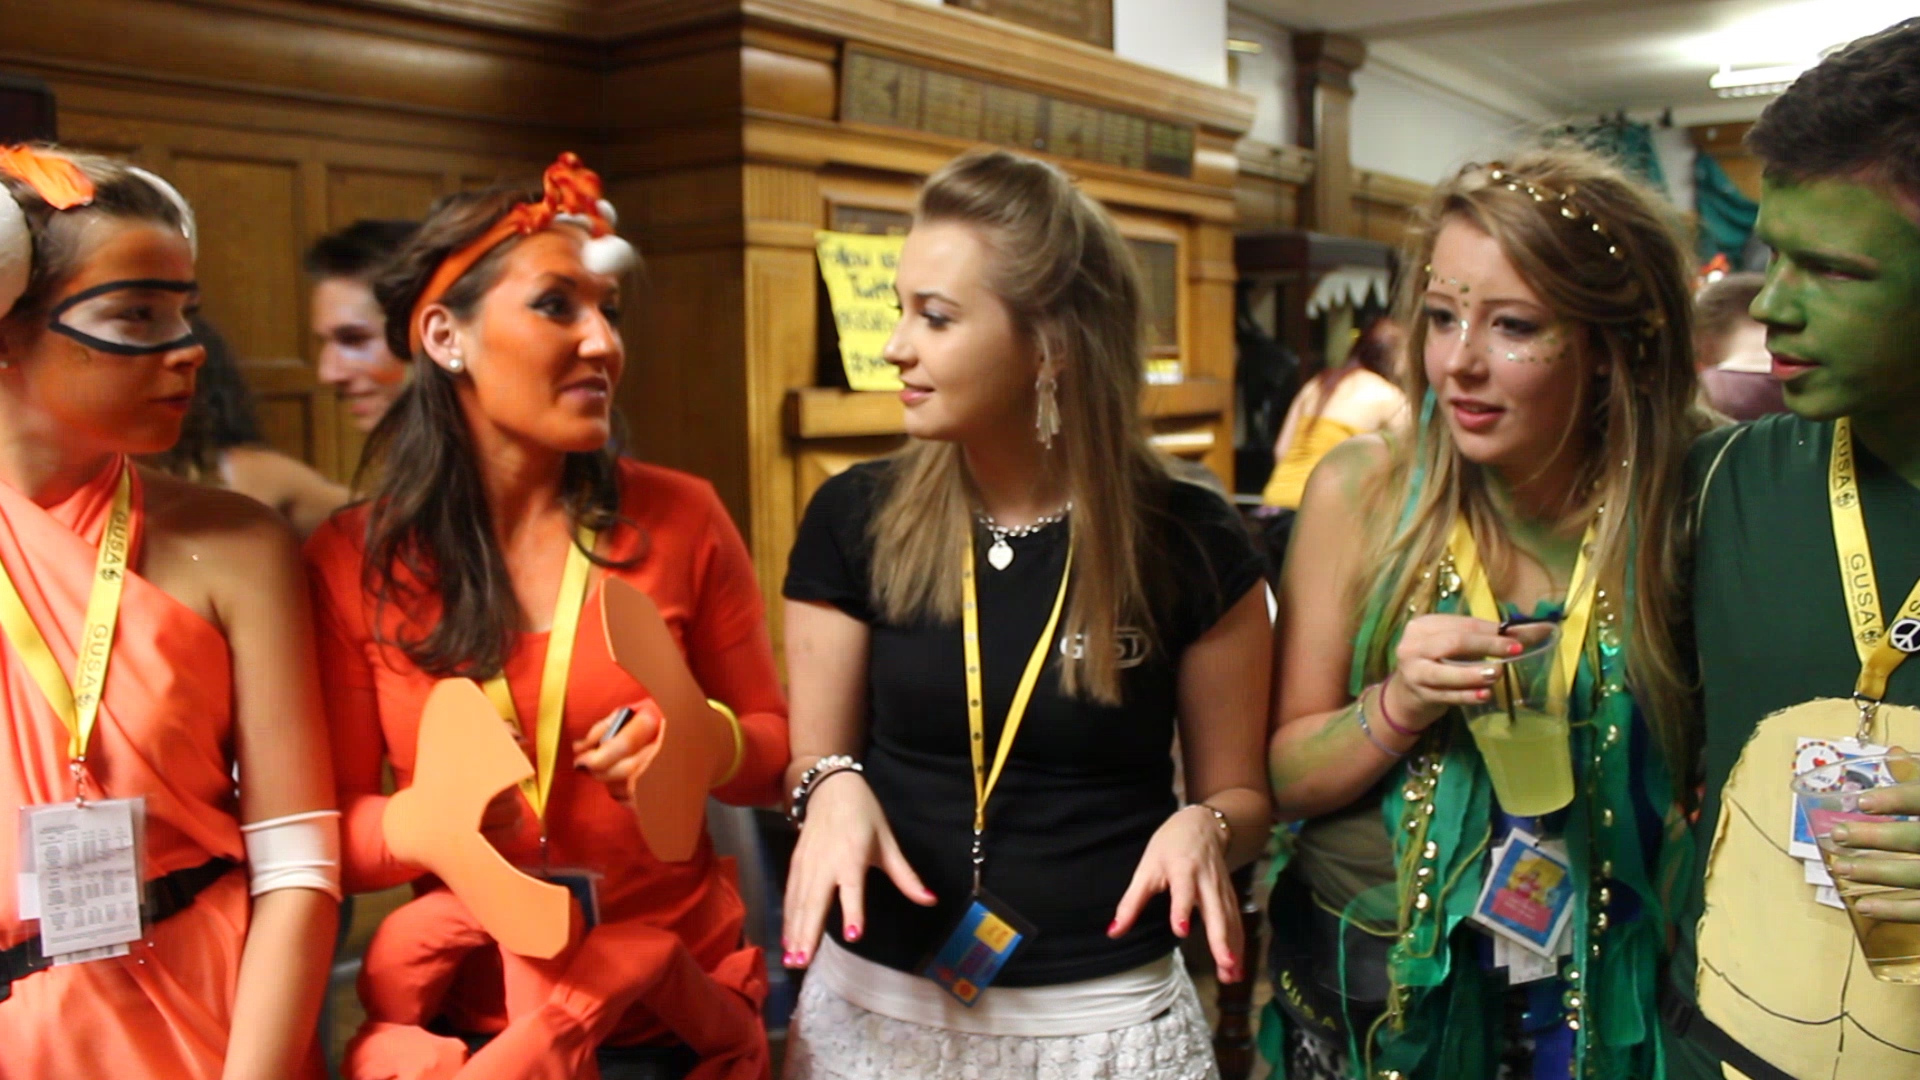 Students in Fancy Dress at Student Union Freshers Fair